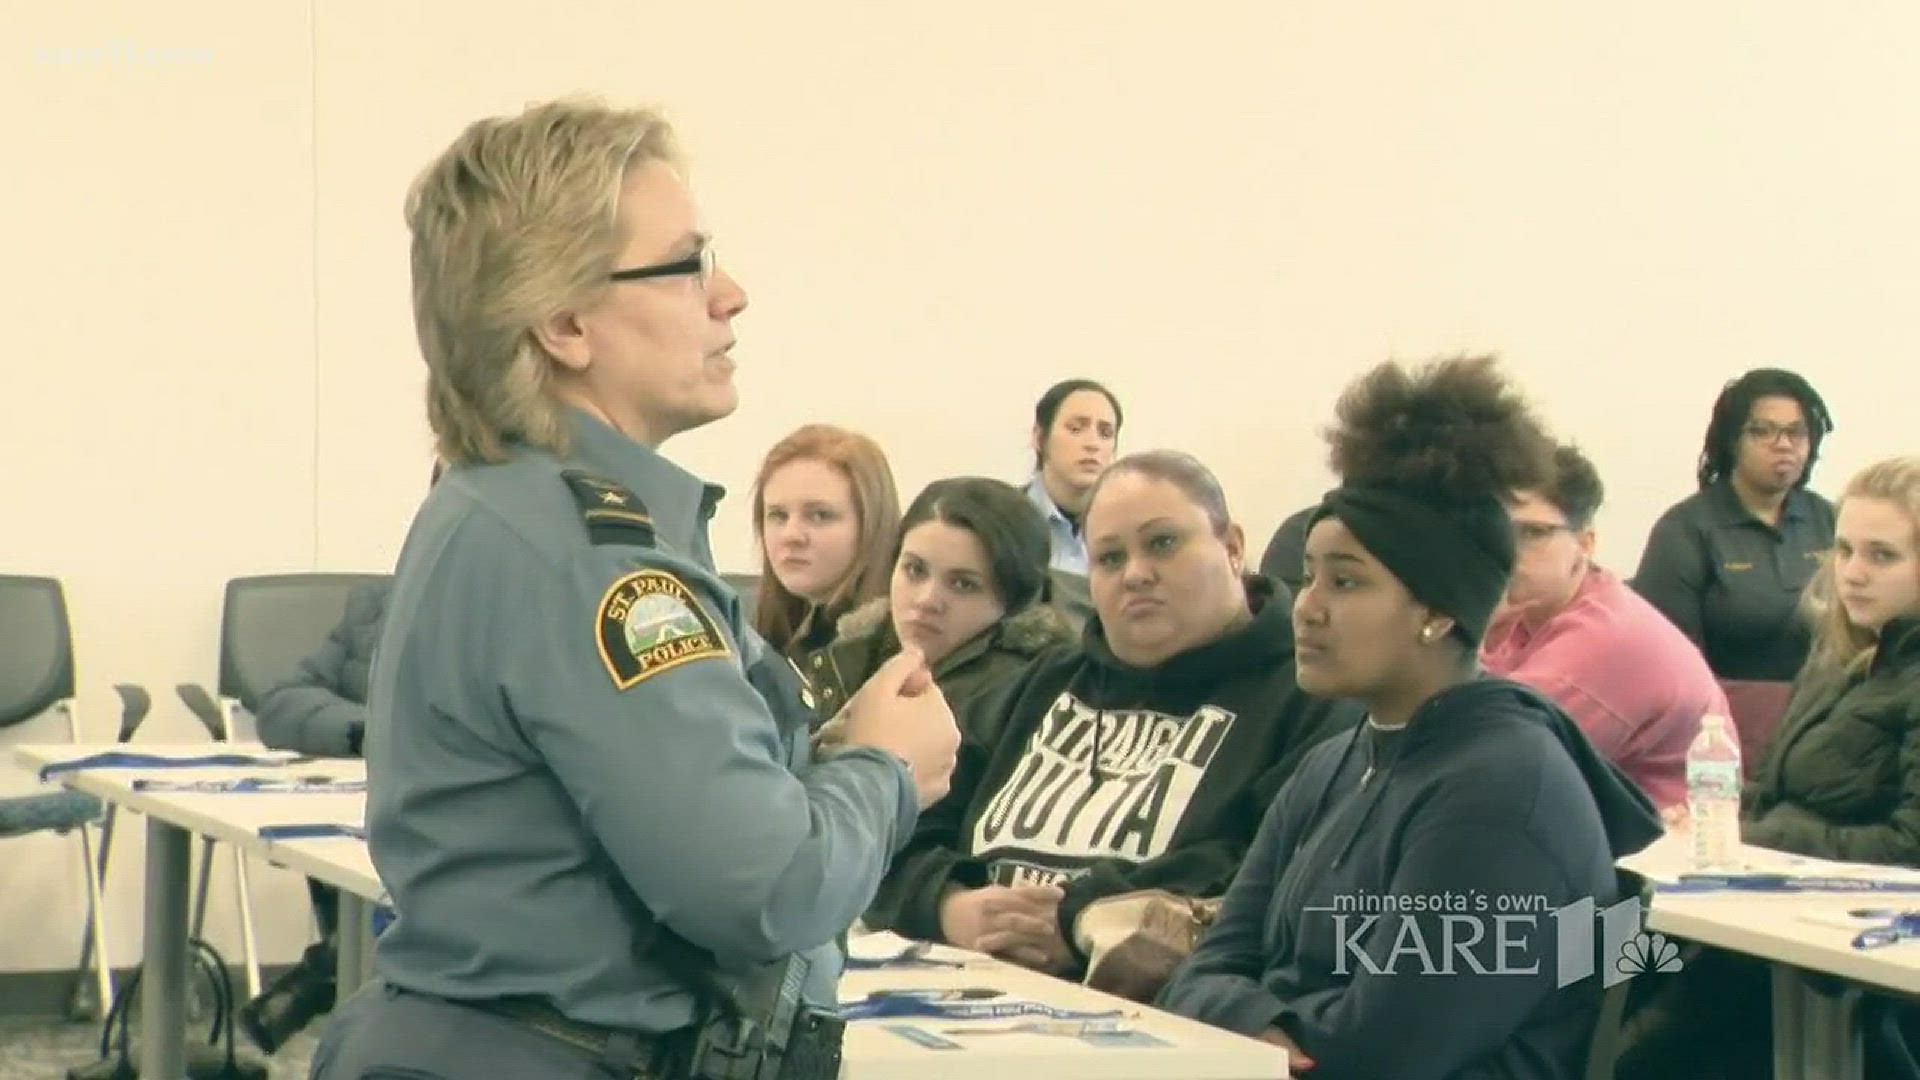 On Saturday, the St. Paul Police Department held its first-ever Women in Uniform recruiting event to try to attract more female officers to the force. http://kare11.tv/2m40vu2